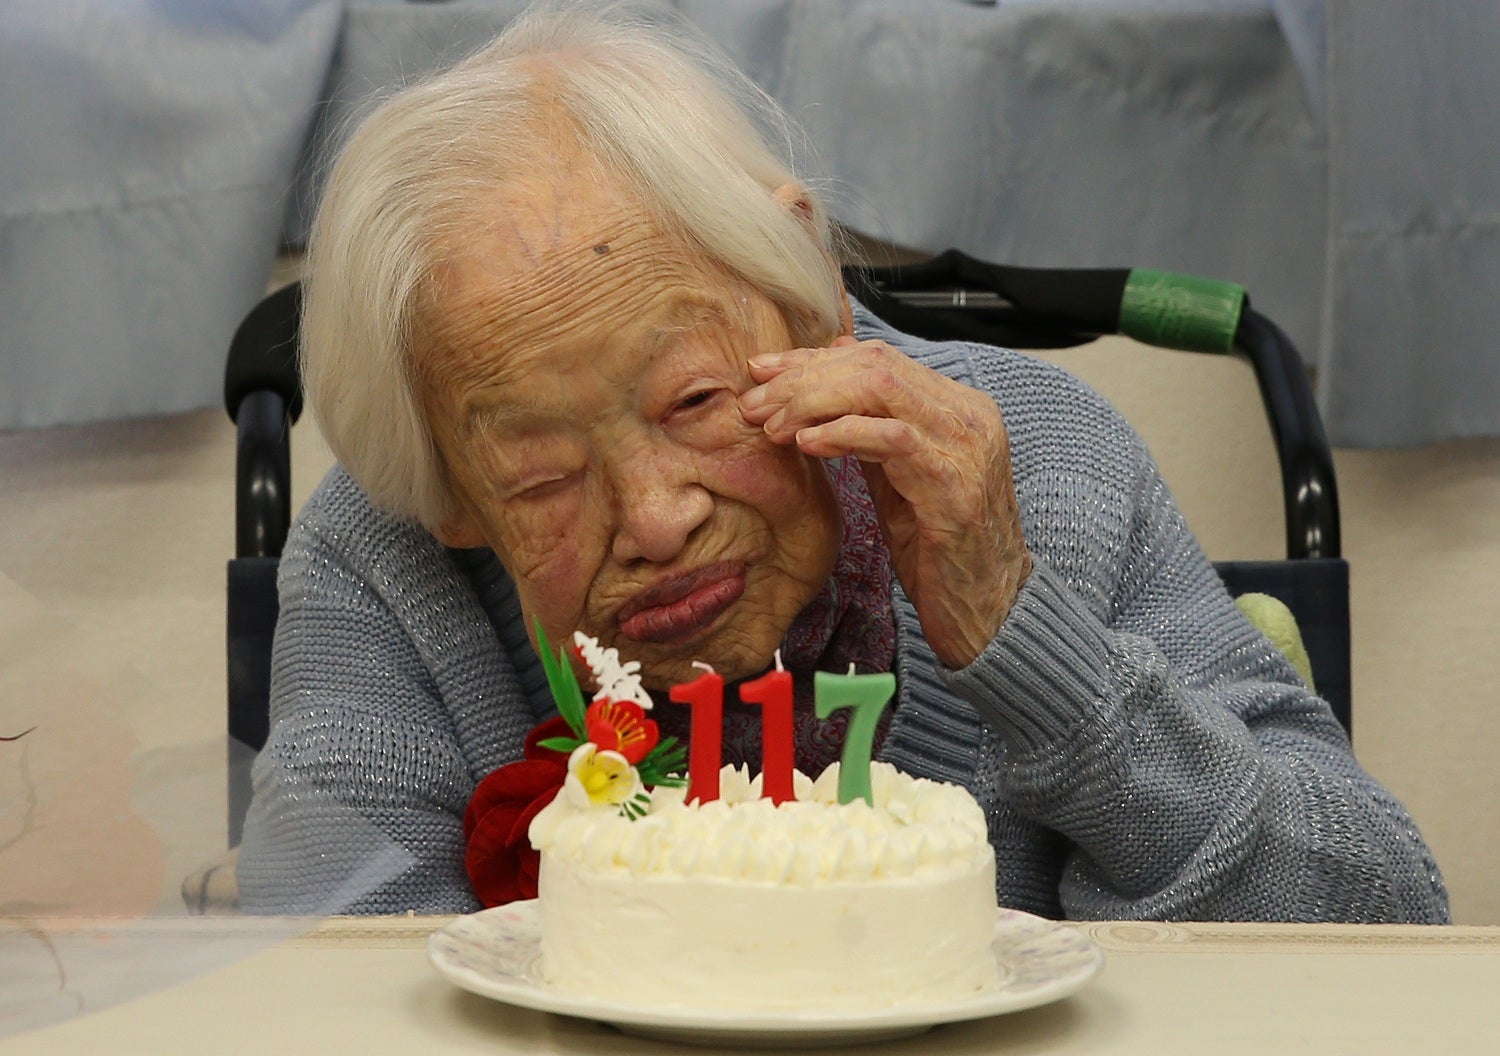 Okawa was born in 1898 and is survived by her grandchildren and great grandchildren